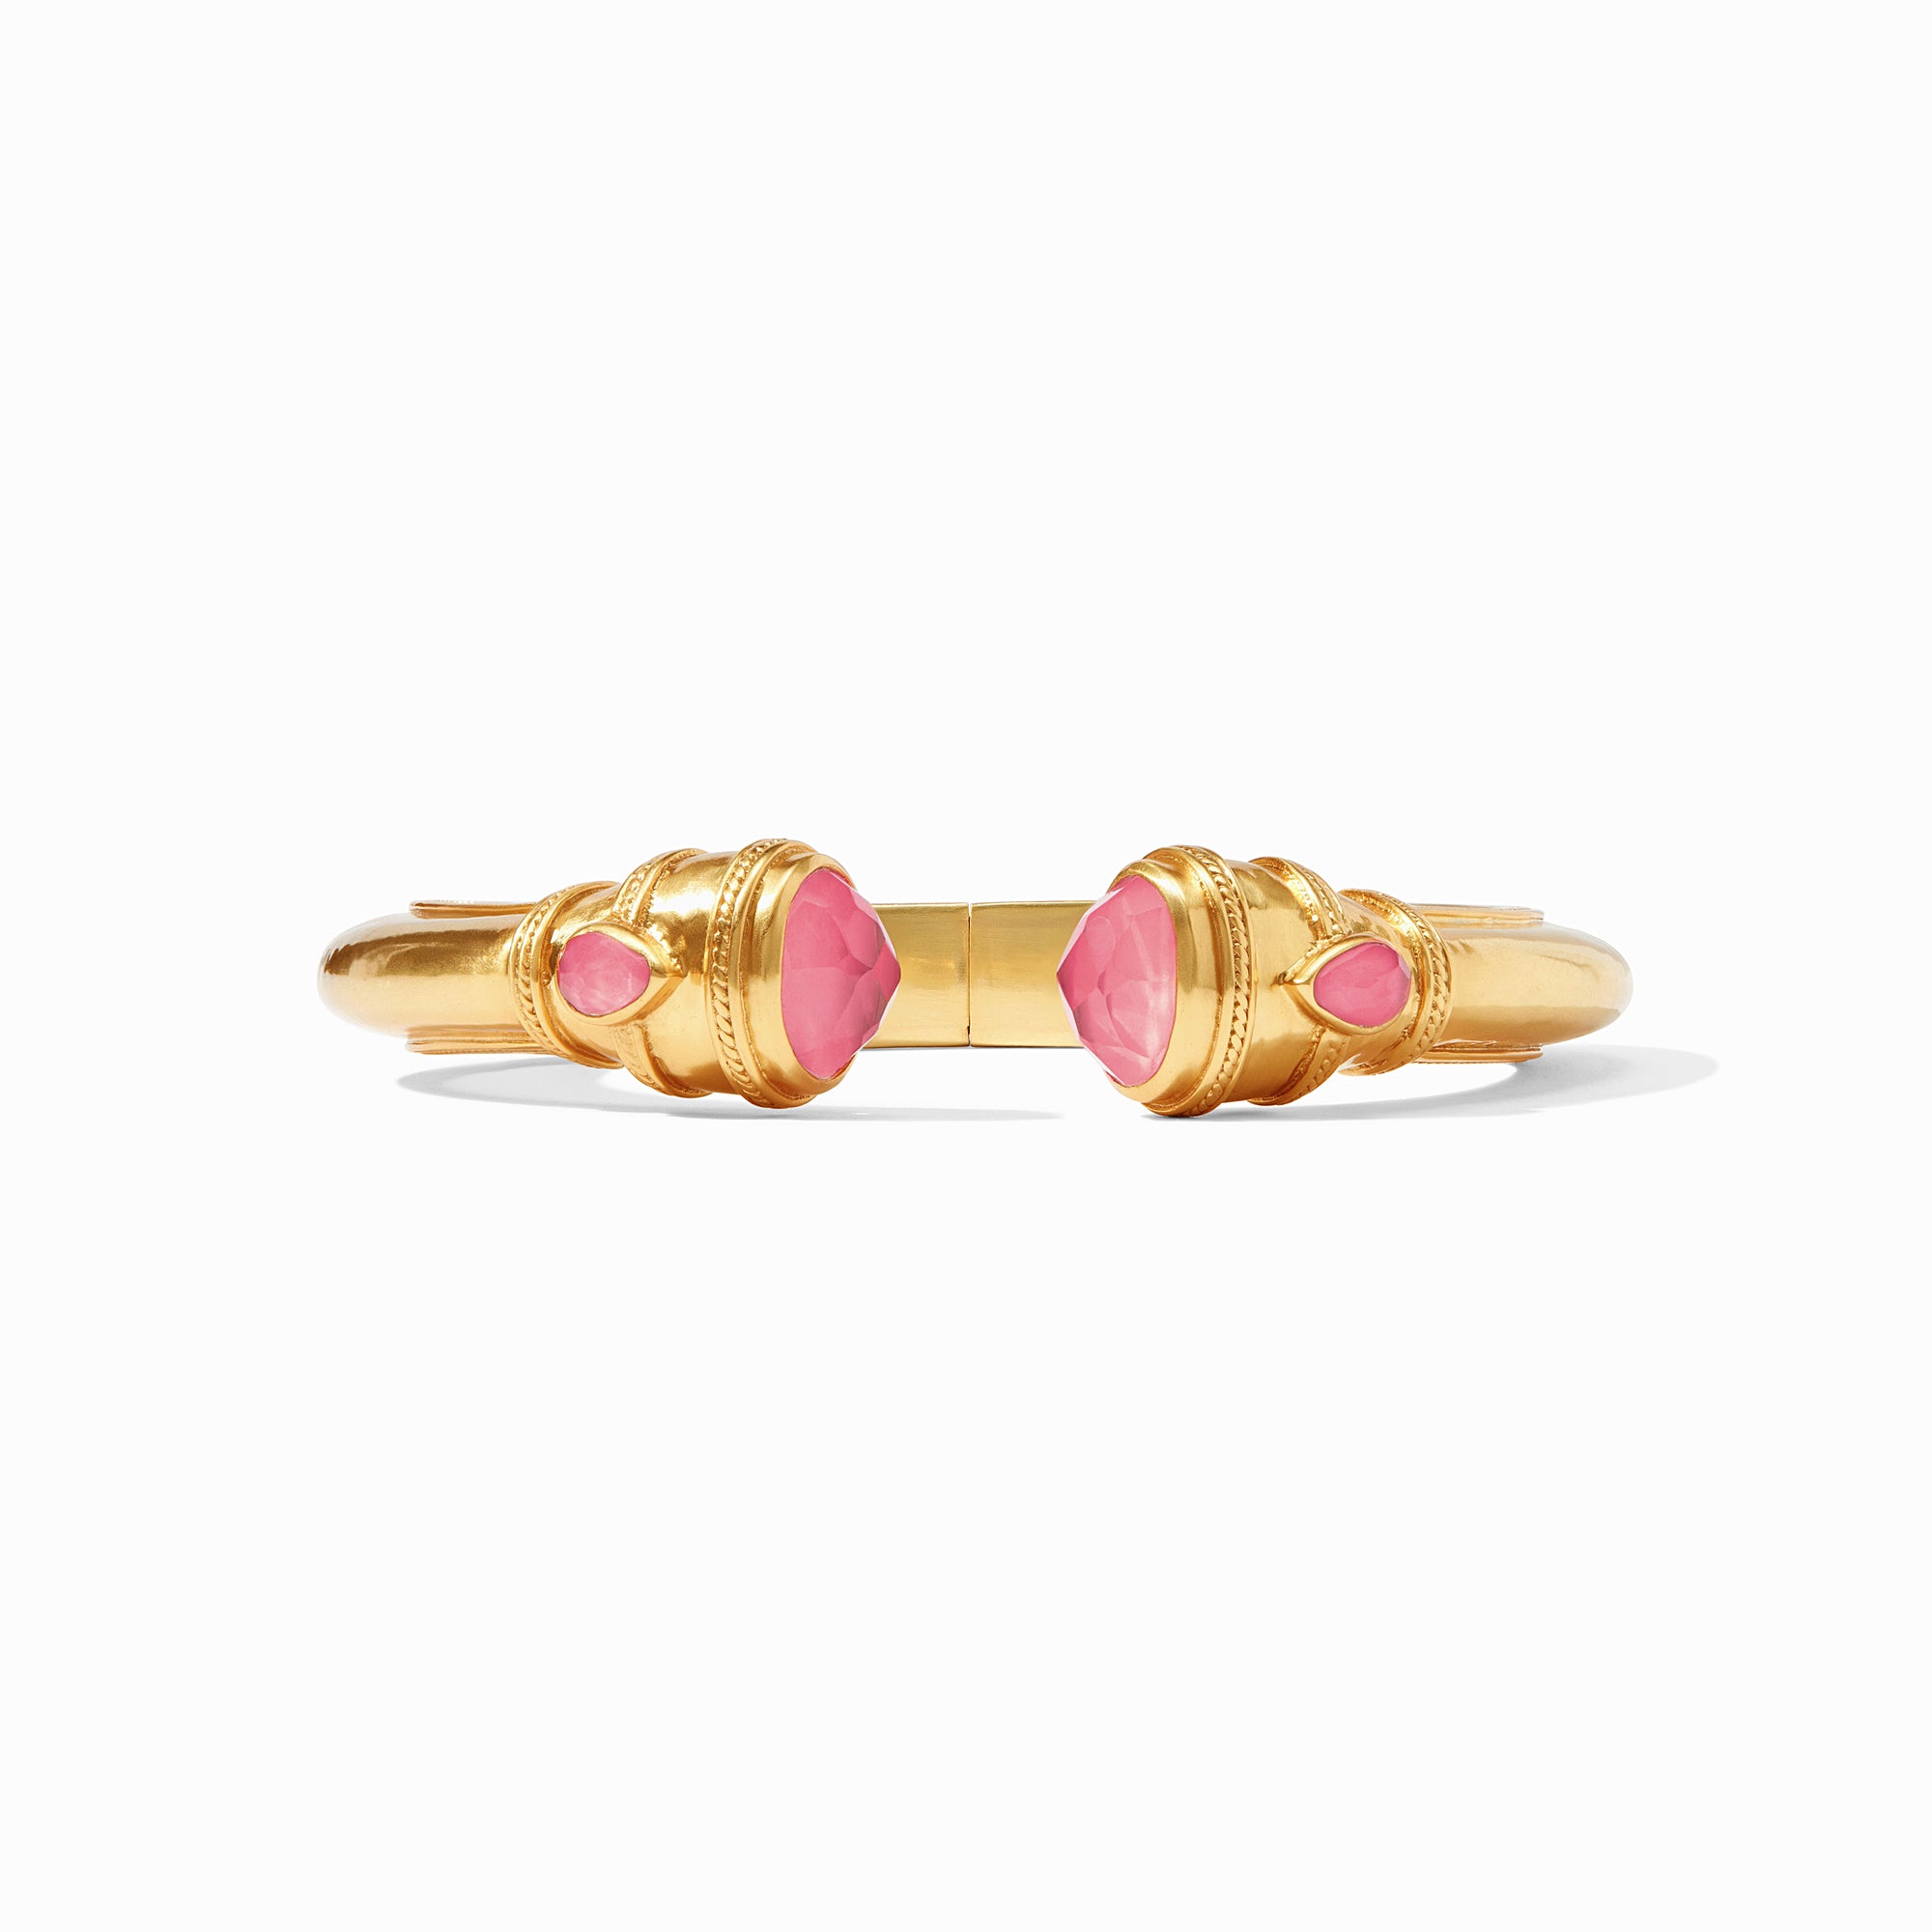 Julie Vos - Cannes Demi Cuff, Iridescent Peony Pink